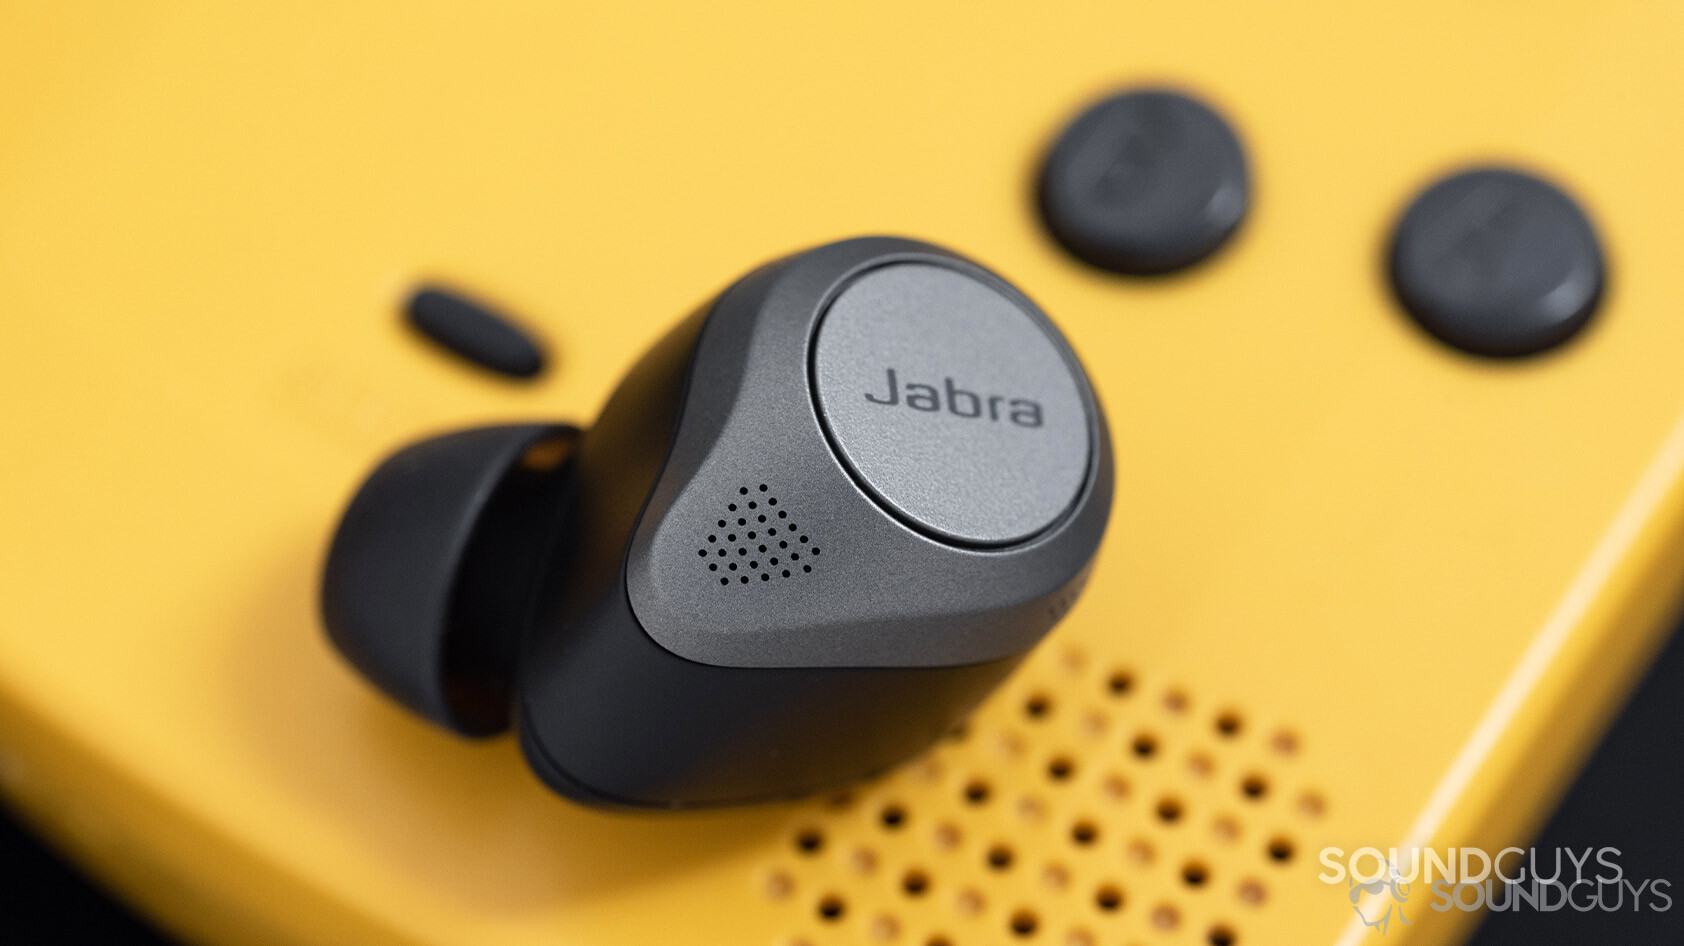 Jabra Elite 85t review: Powerful ANC in an earbuds form factor, six mics  for calls